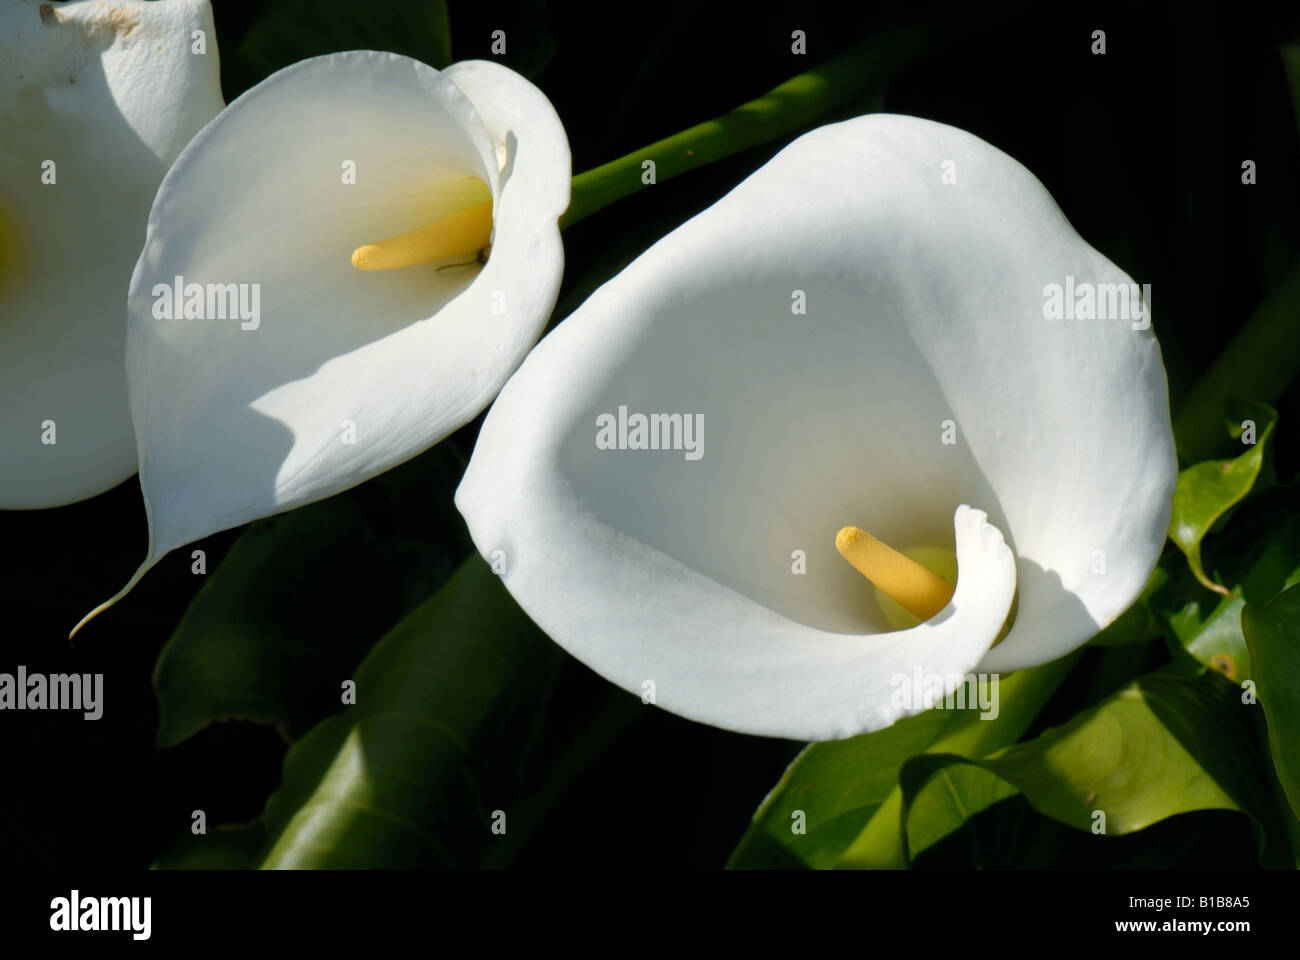 White flowers and pistil of an arum lily Zantedeschia aethiopica Stock Photo